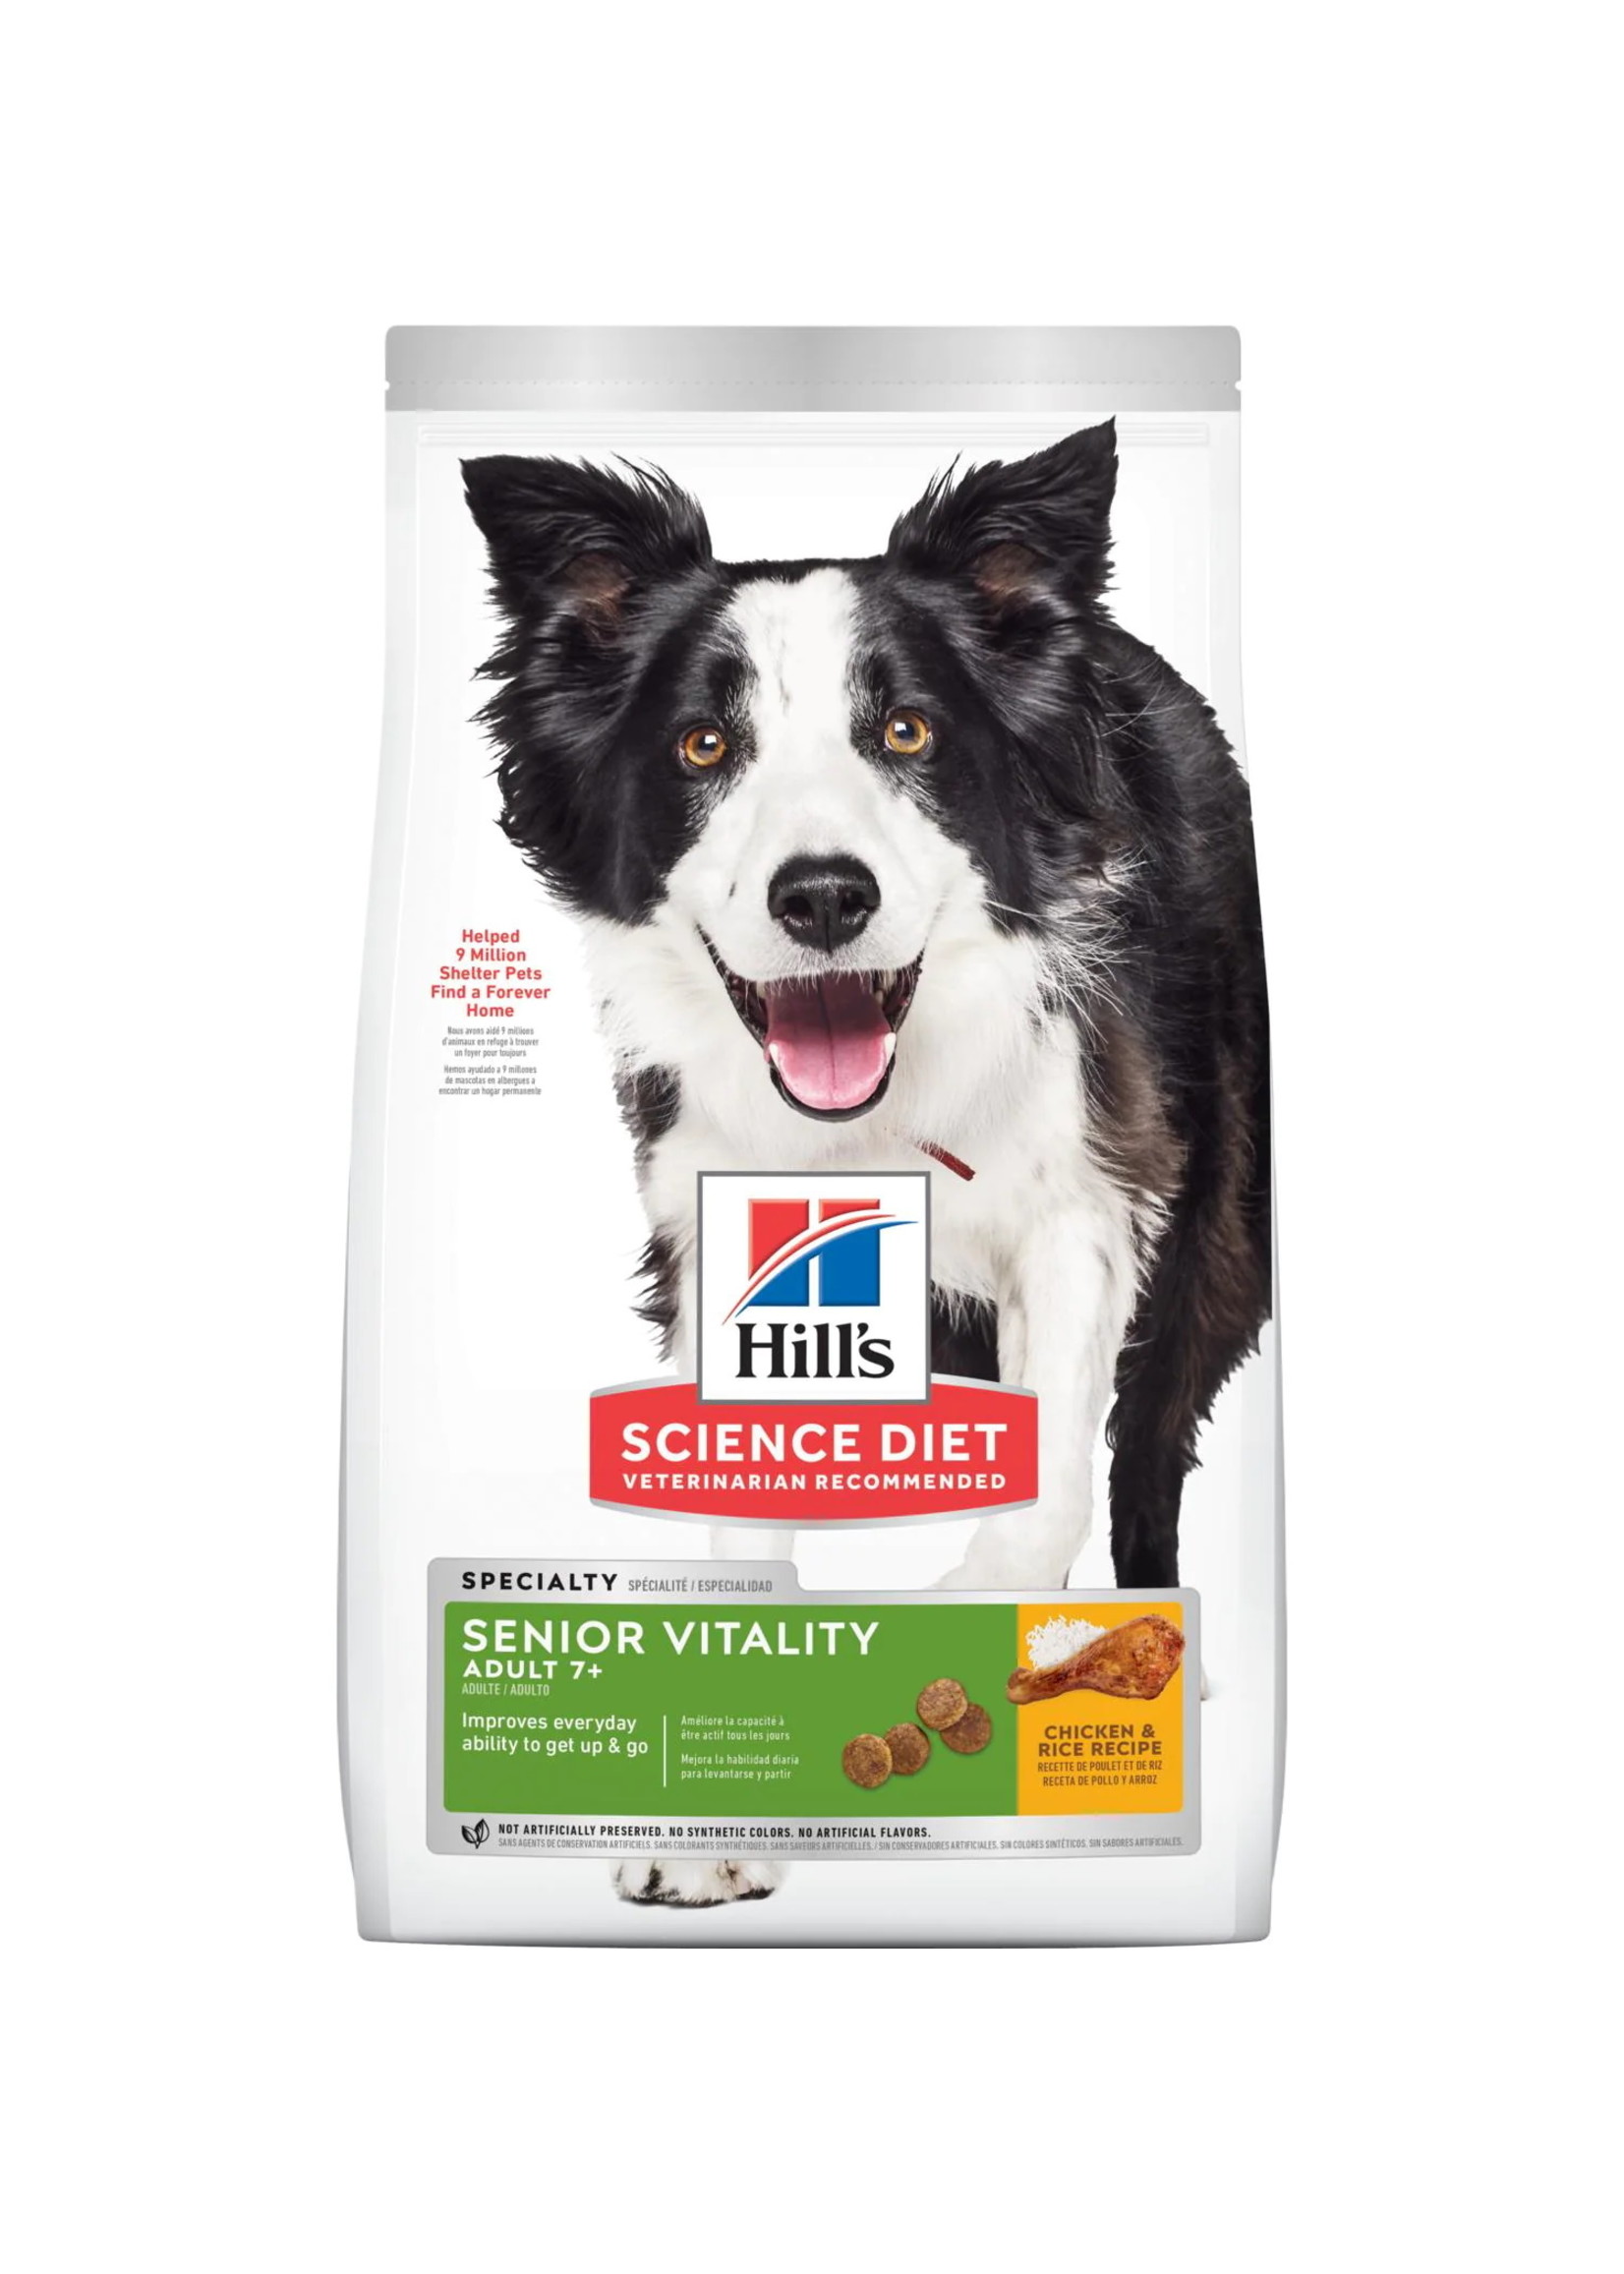 Hill's Science Diet Hill's Science Diet Adult 7+ Senior Vitality Dog Food